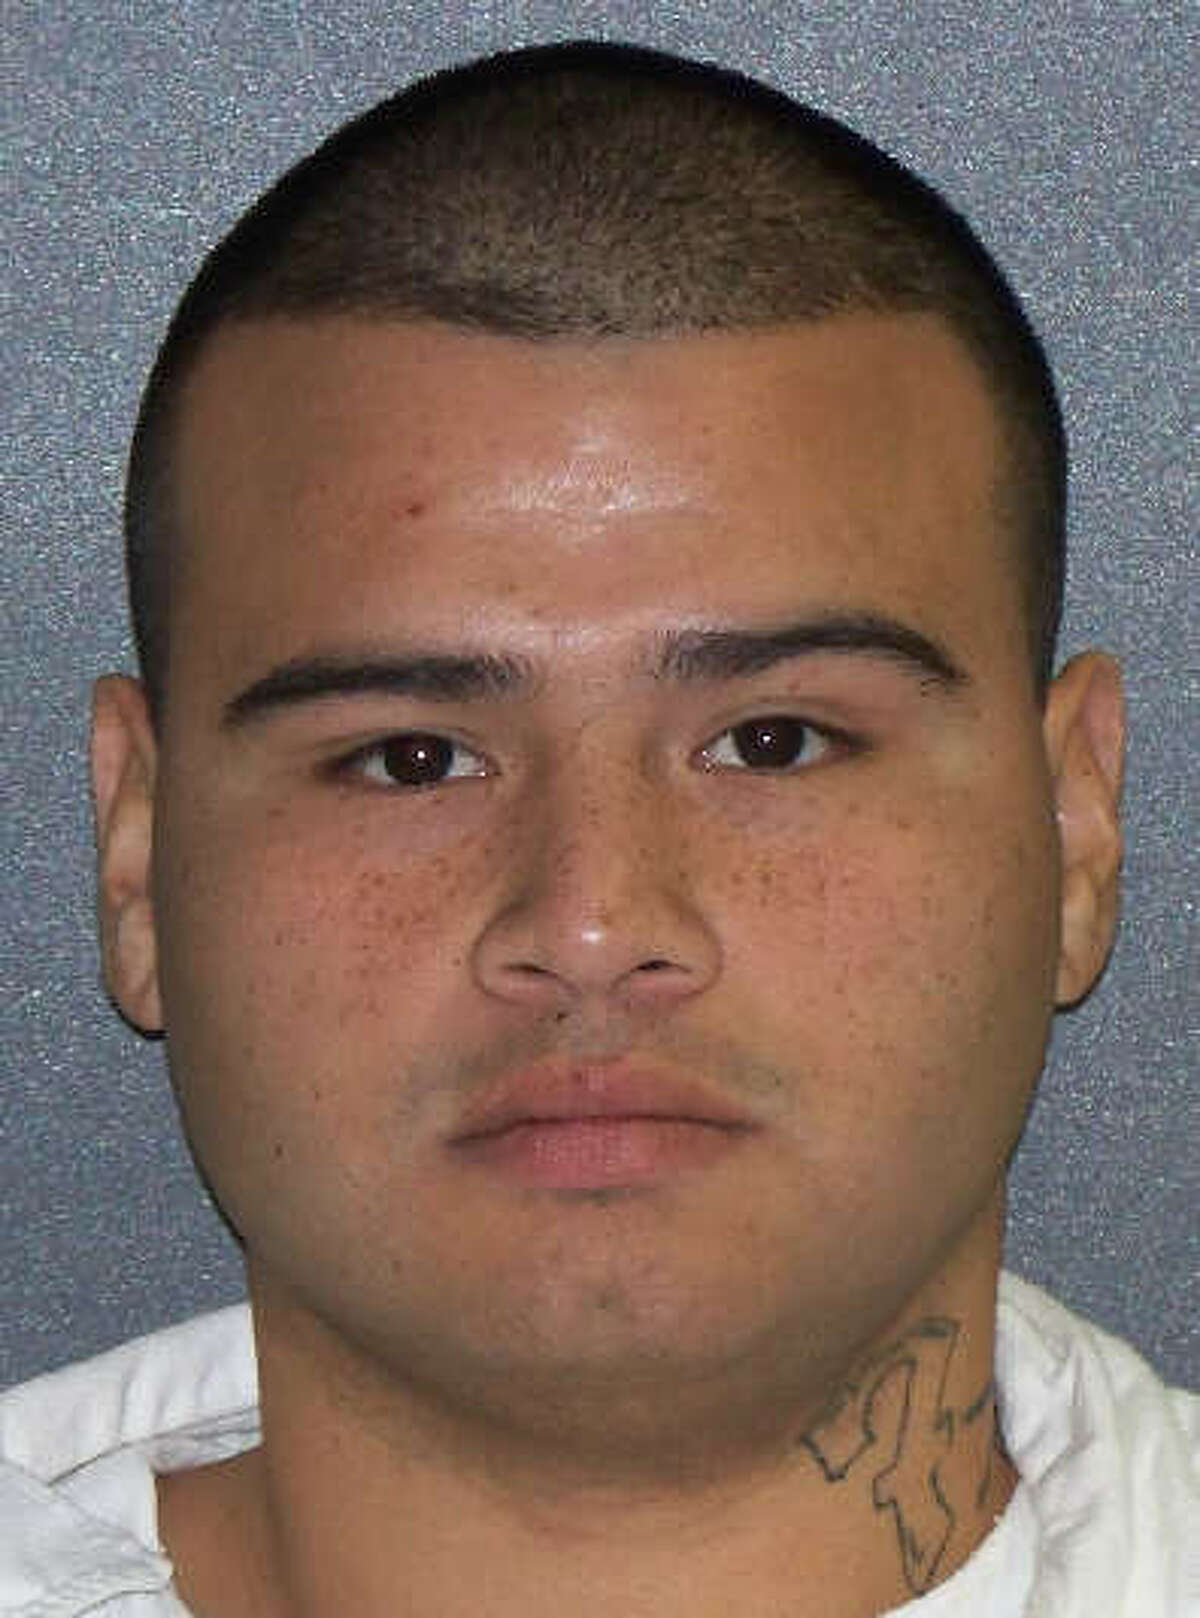 This is a 2004 Texas Department of Criminal Justice mug shot of Javier Resendez, who a decade ago was sentenced to 15 years in prison for a Harris County cocaine conviction. He was released on parole in 2010, but pleaded guilty Monday for his role in recruiting people with clean criminal records to buy guns that were smuggled to a Mexican drug cartel.